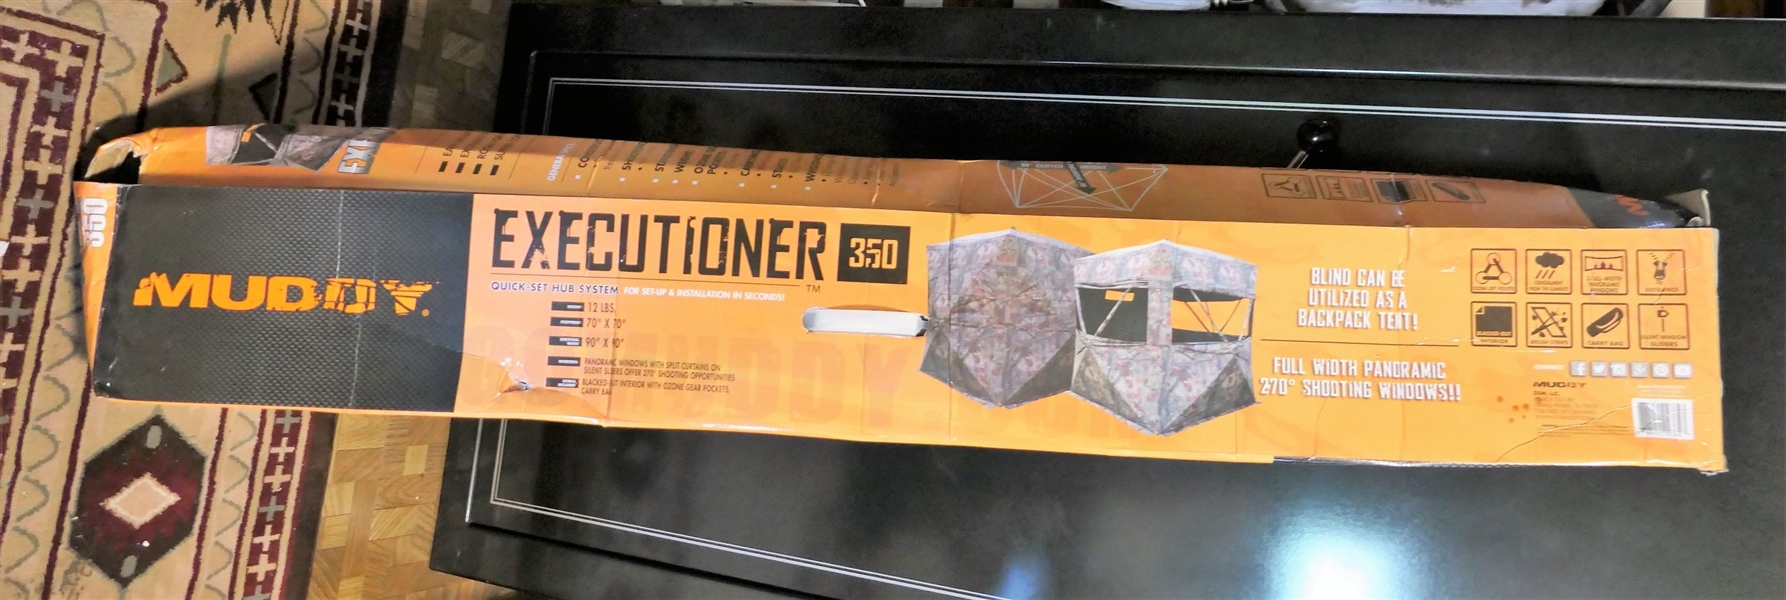 Muddy "Executioner 350" Hunting Blind in Original Box - 80" Center Height 90" Shooting Width